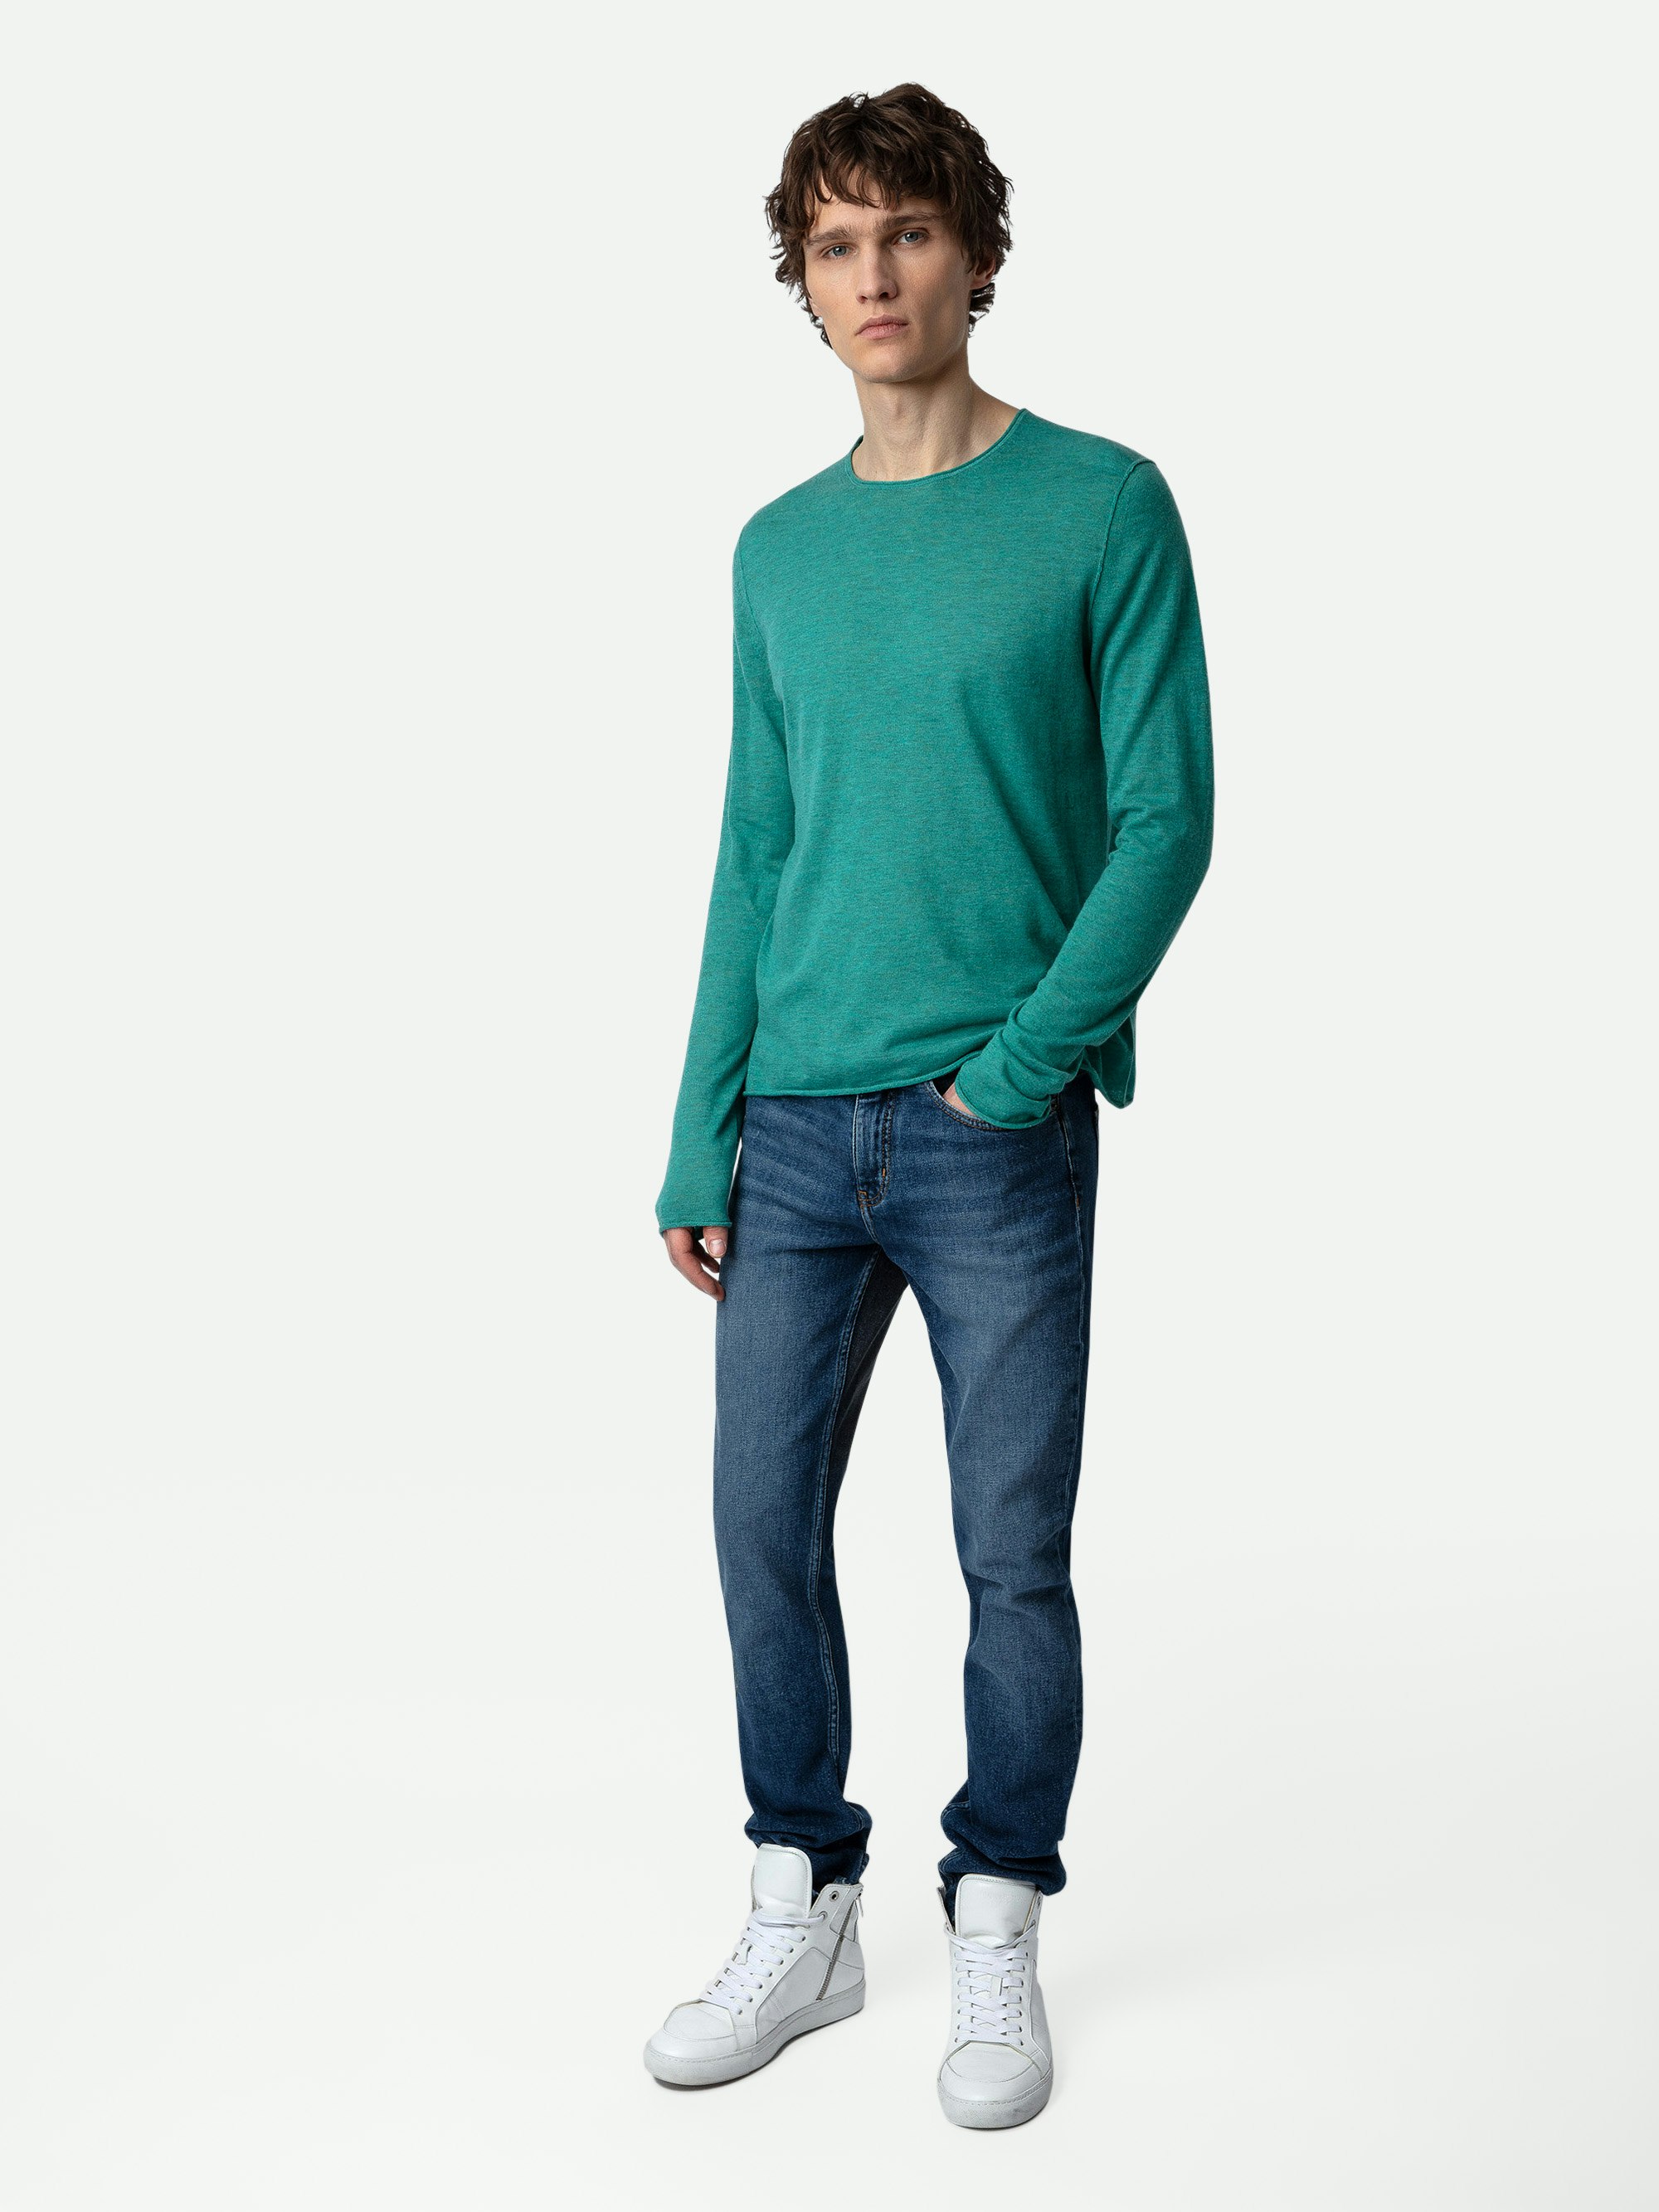 Teiss Jumper 100% Cashmere - Blue green feather 100% cashmere jumper with round neckline and long sleeves.